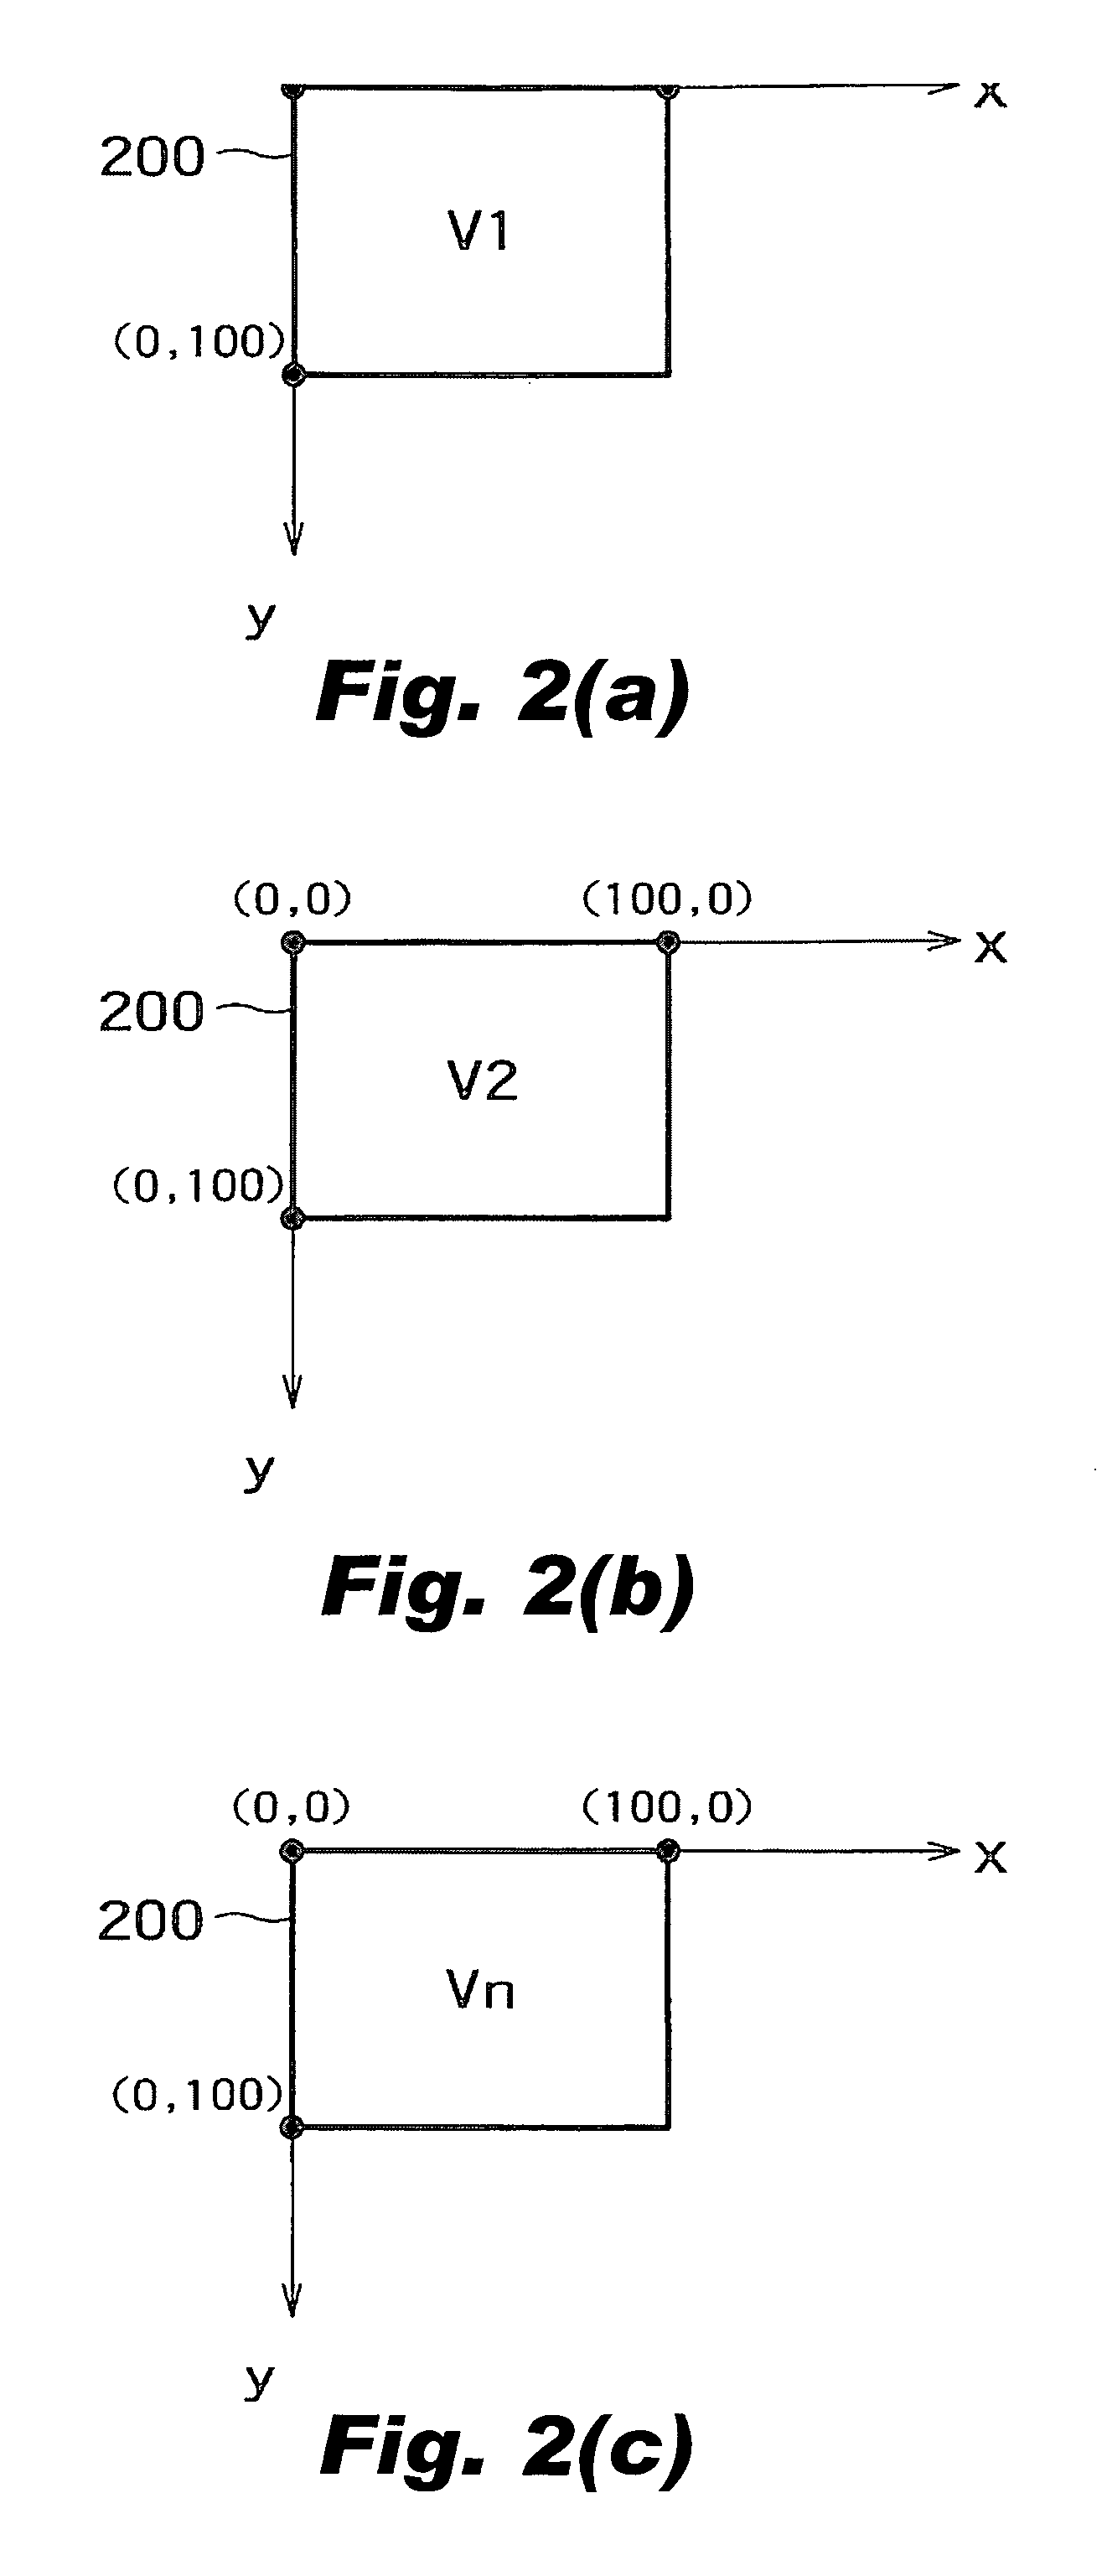 Image control from composed composite image using HID signal conversion to source image coordinates